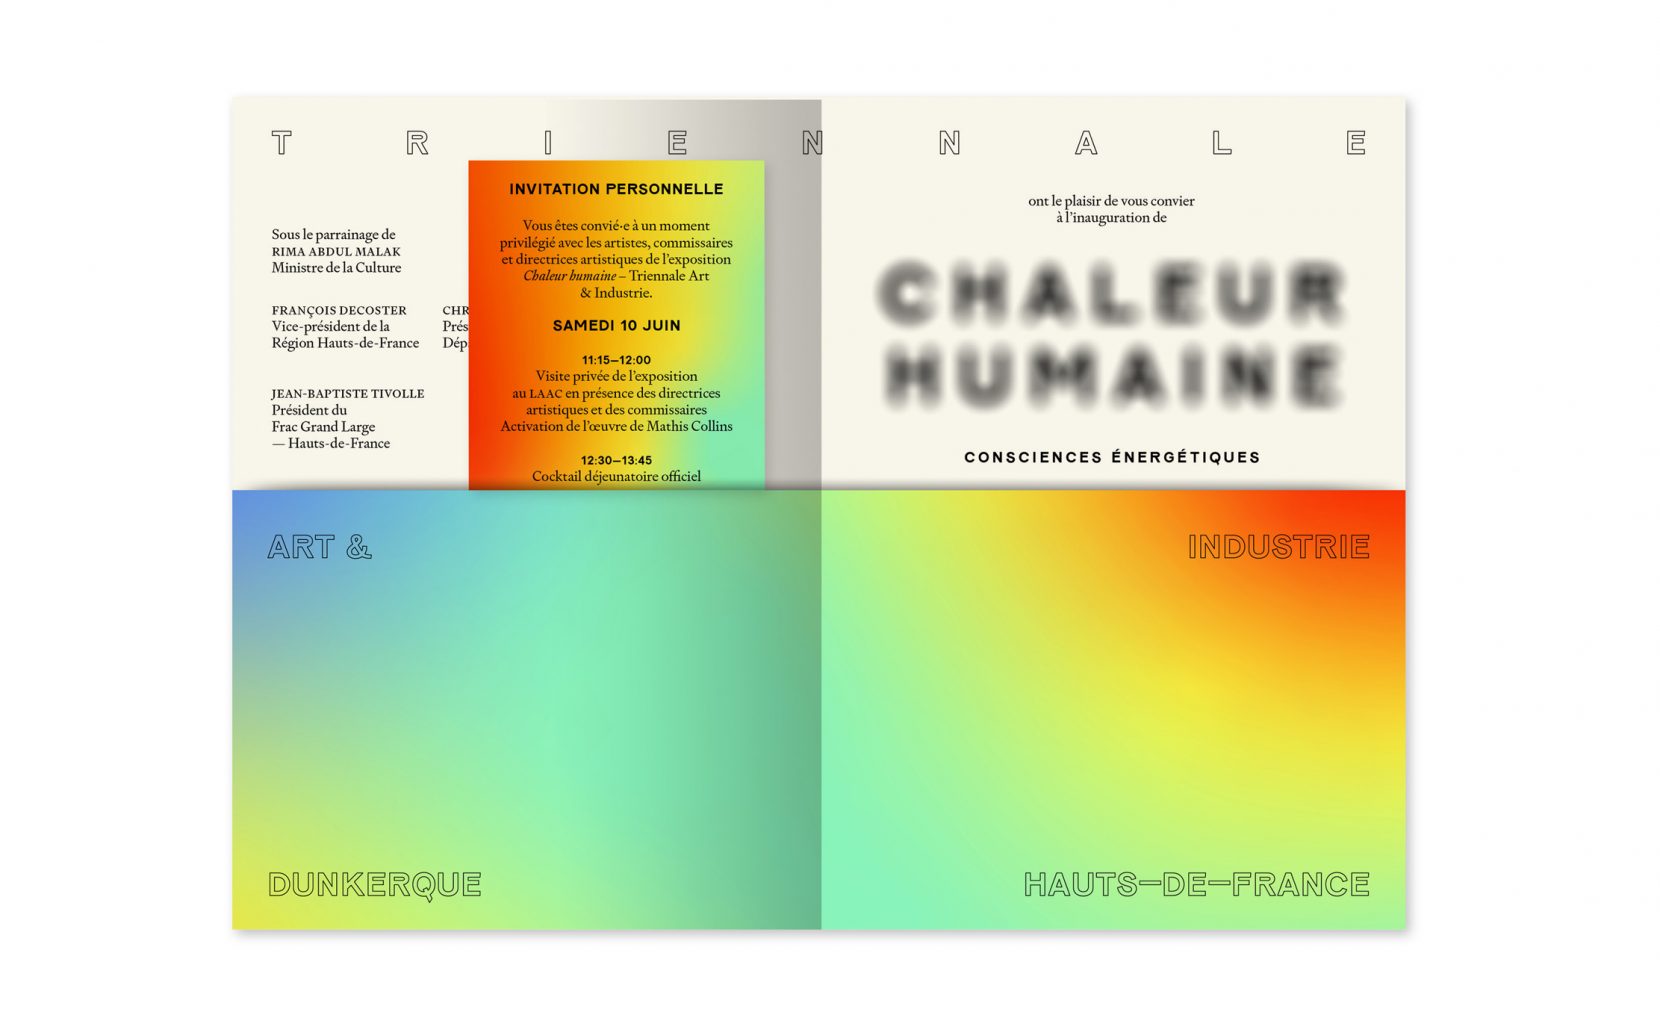 Invitation Chaleur Humaine, Triennale Art & Industrie, Dunkerque, North of France, designed by In the shade of a tree studio, founded by Sophie Demay and Maël Fournier Comte, joined by Jimmy Cintero.